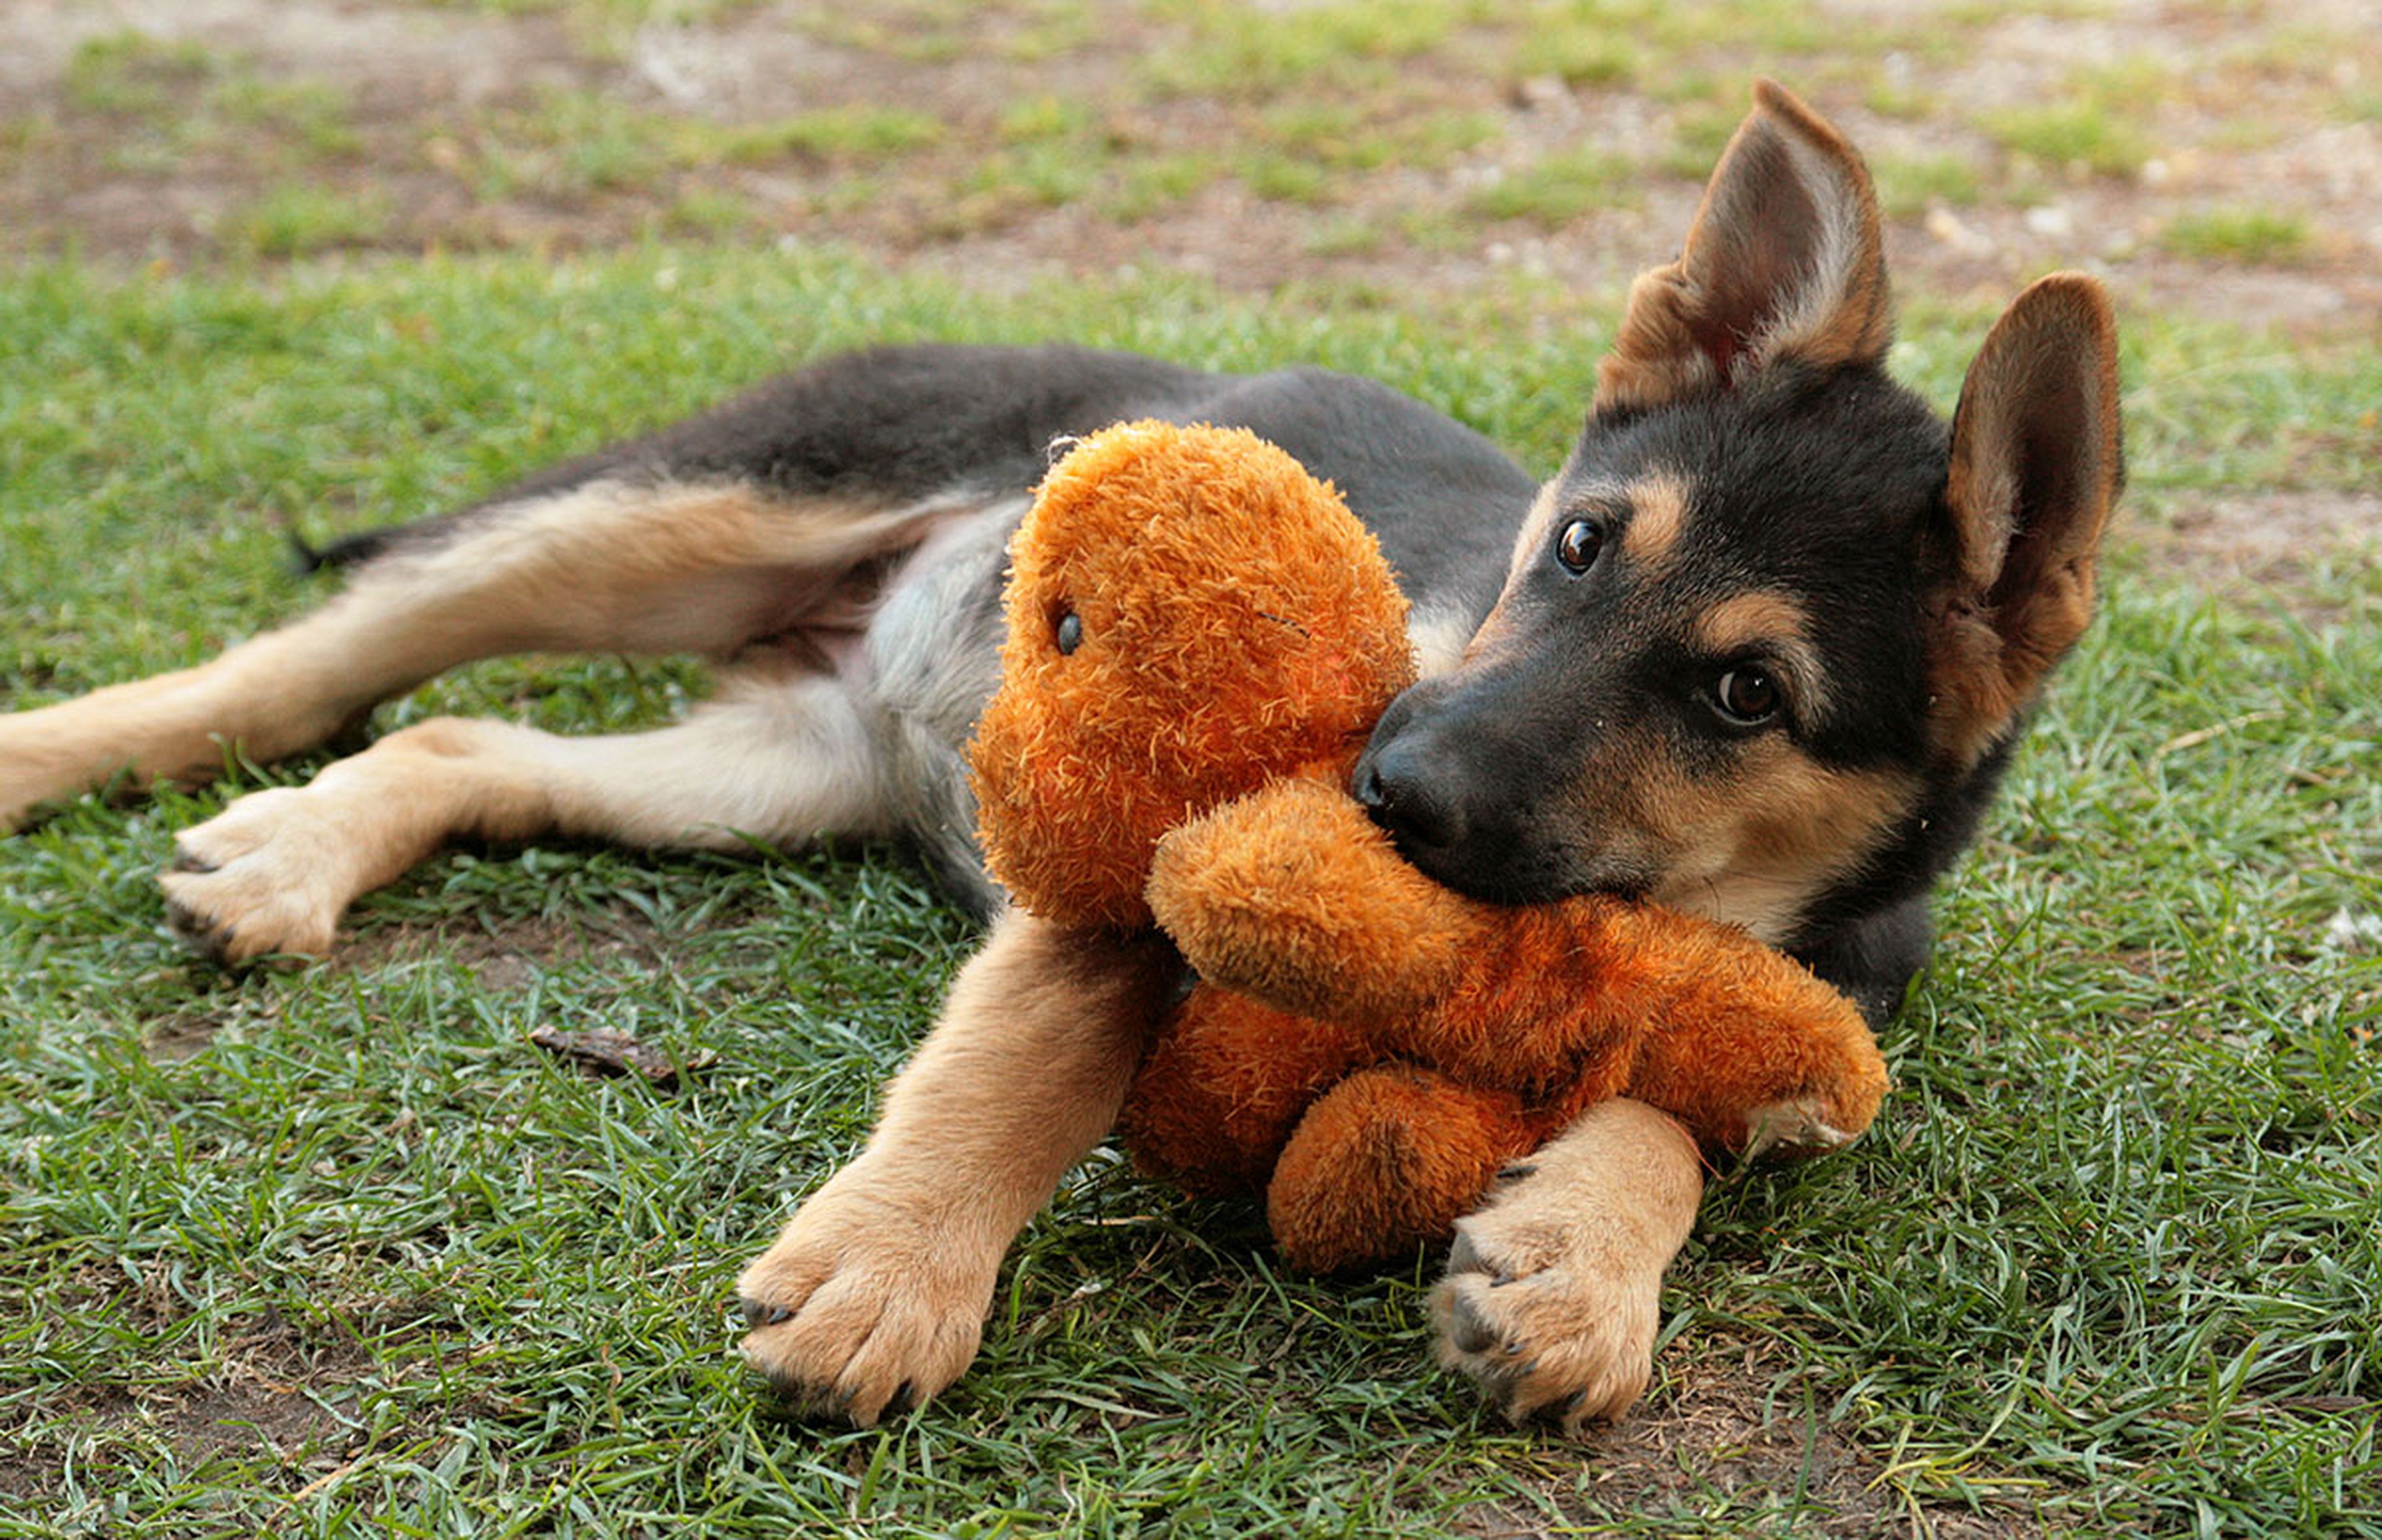 A german shepherd puppy playing with a stuffed toy while laying on grass.